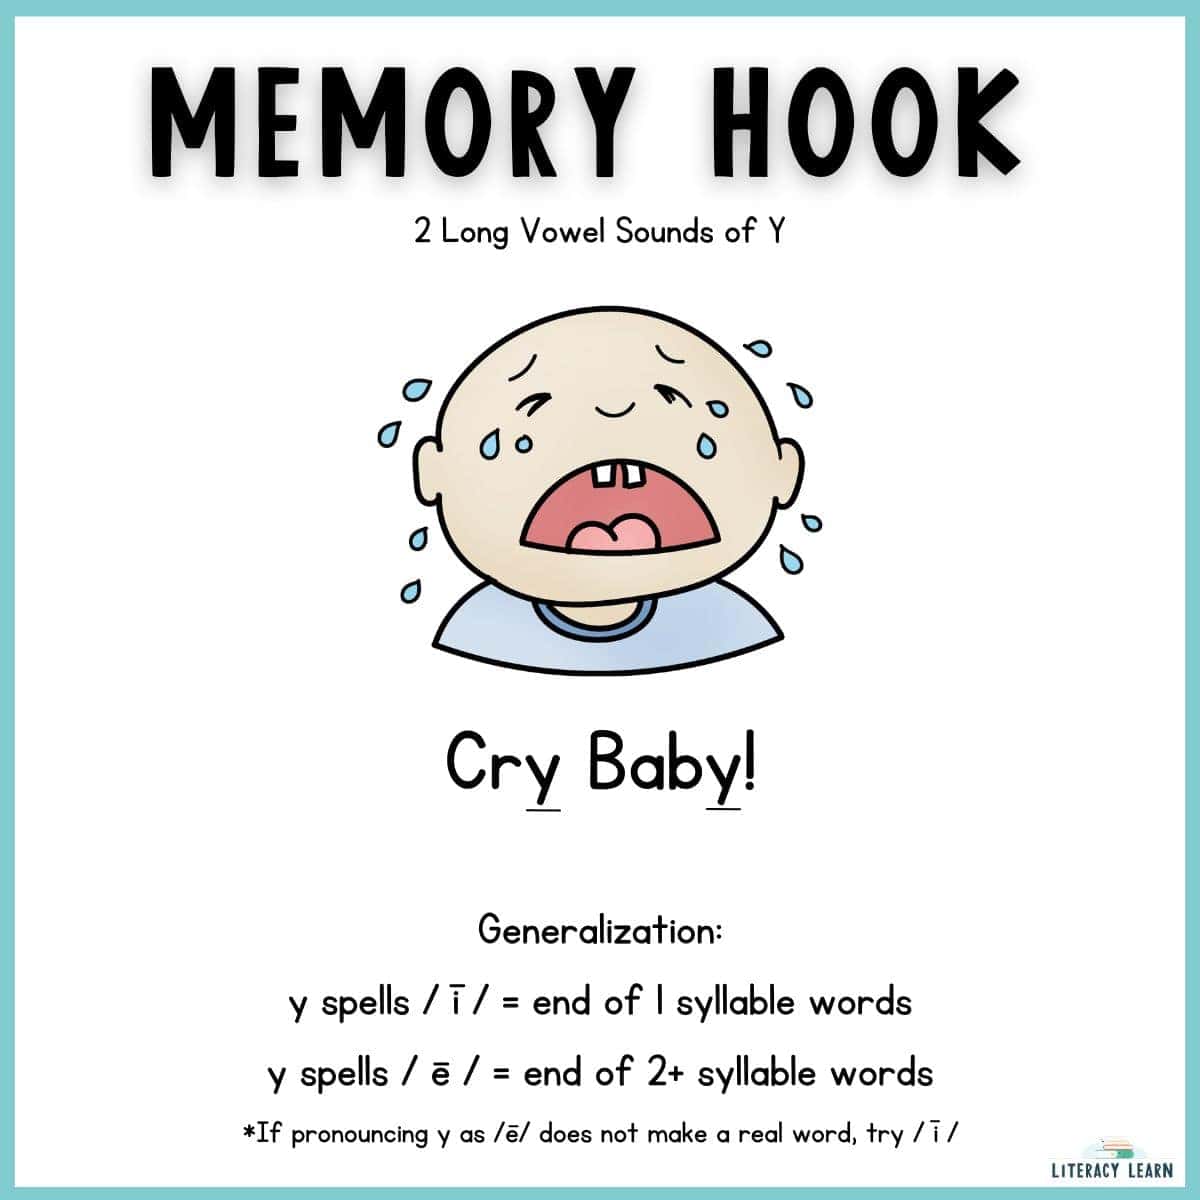 Graphic showing the memory hook "Cry Baby" to remember the pronunciation for long vowel Y.